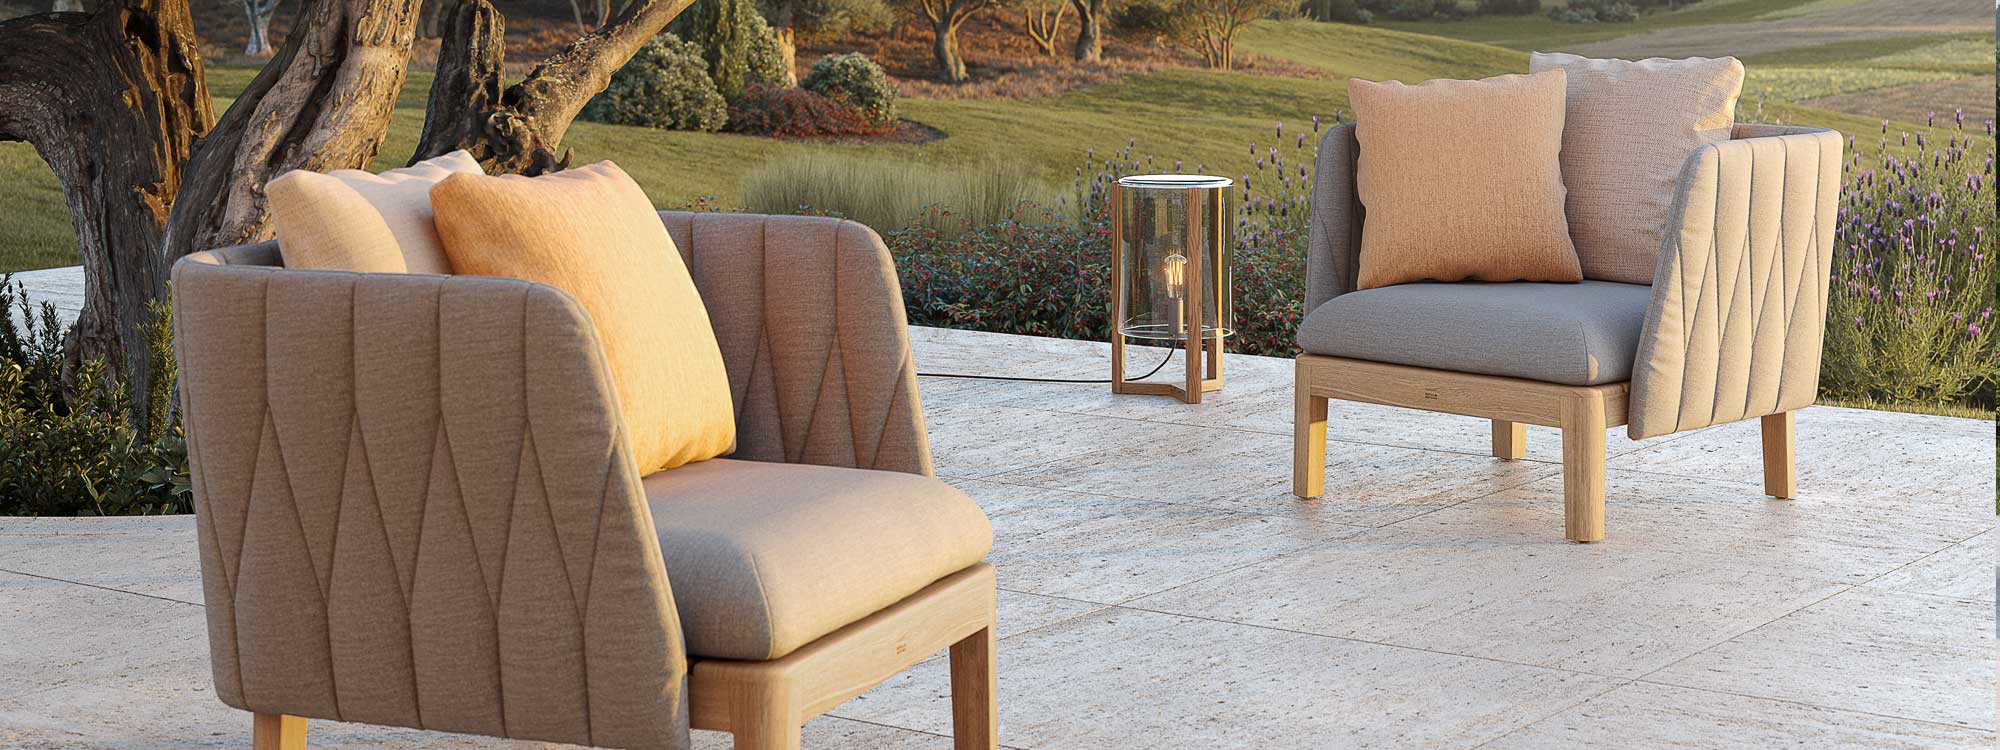 Image of Pair of Royal Botania Styletto garden lounge chairs on terrace in soft evening light